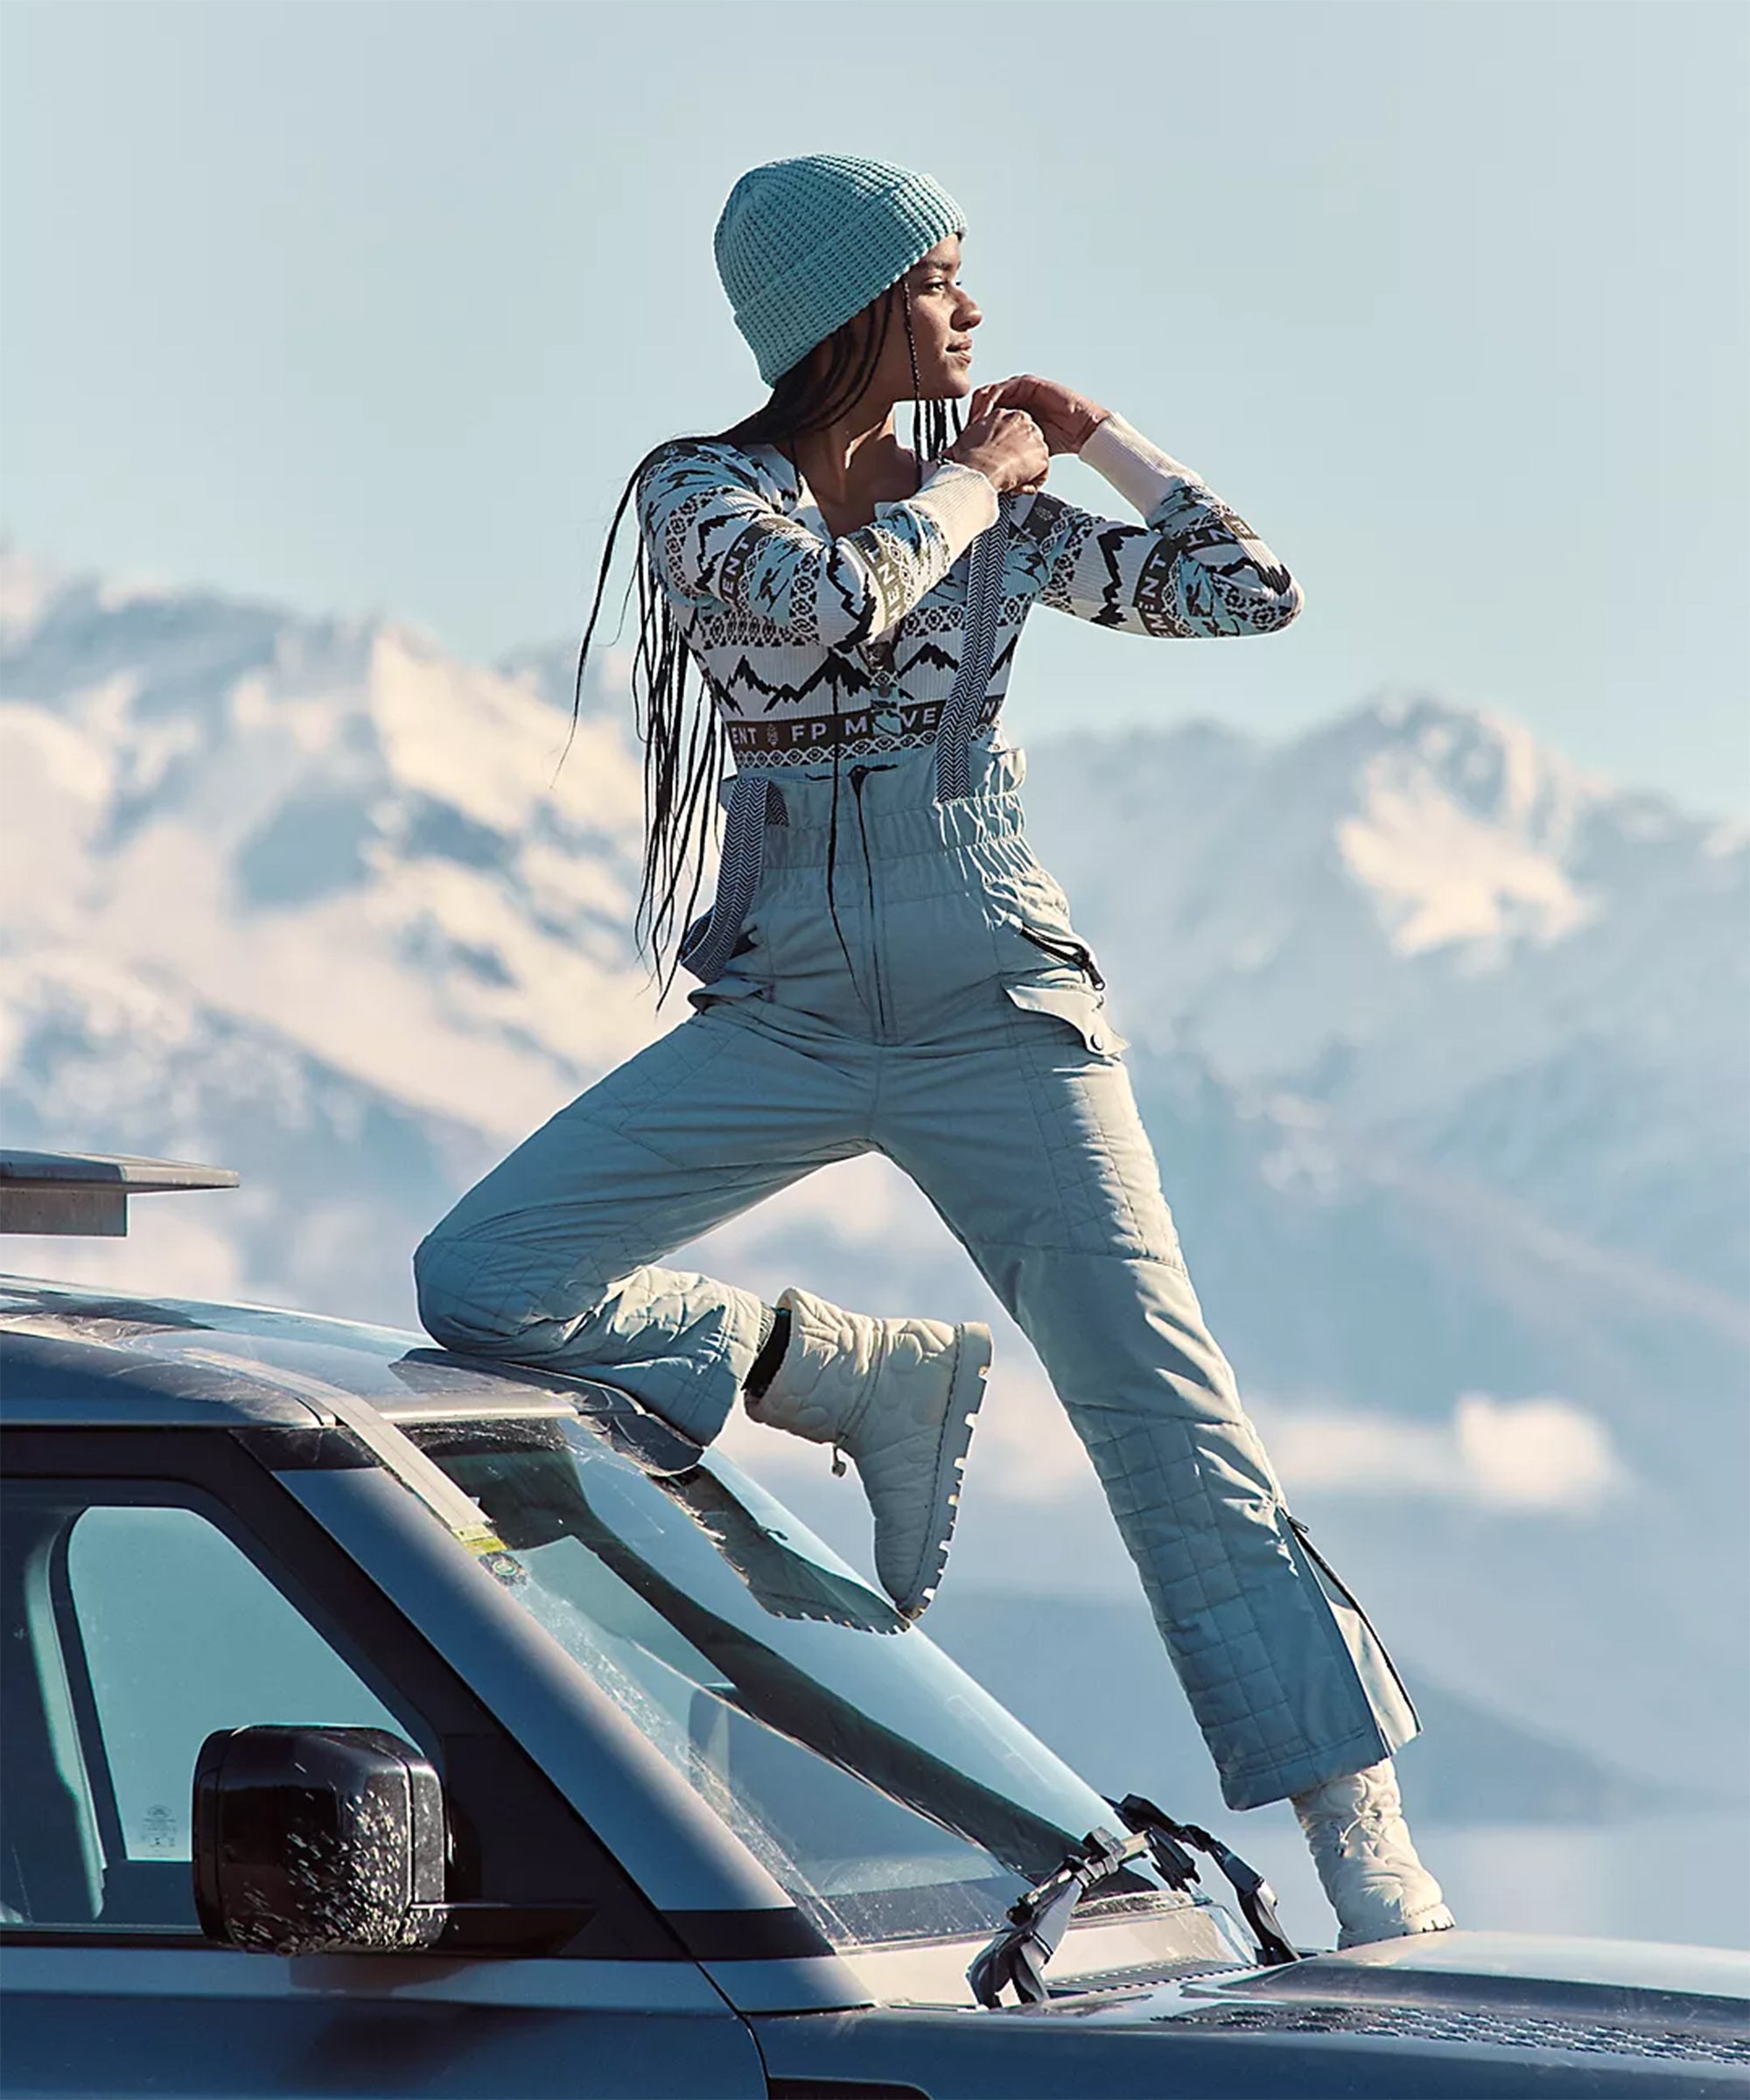 Ski Chic: What To Wear On The Slopes